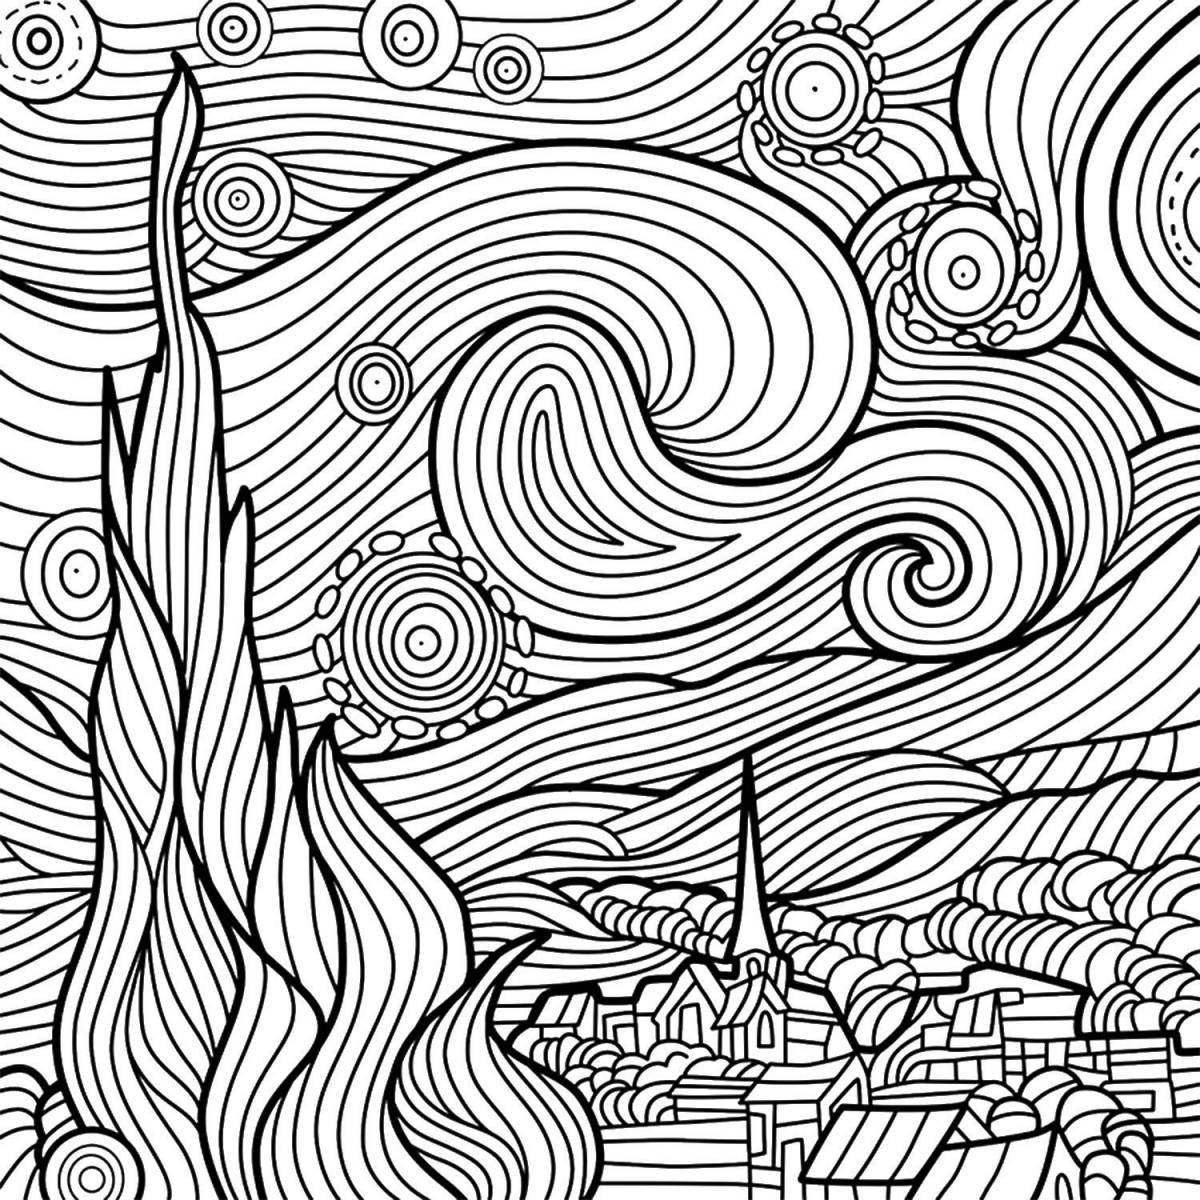 Gorgeous starry night coloring page